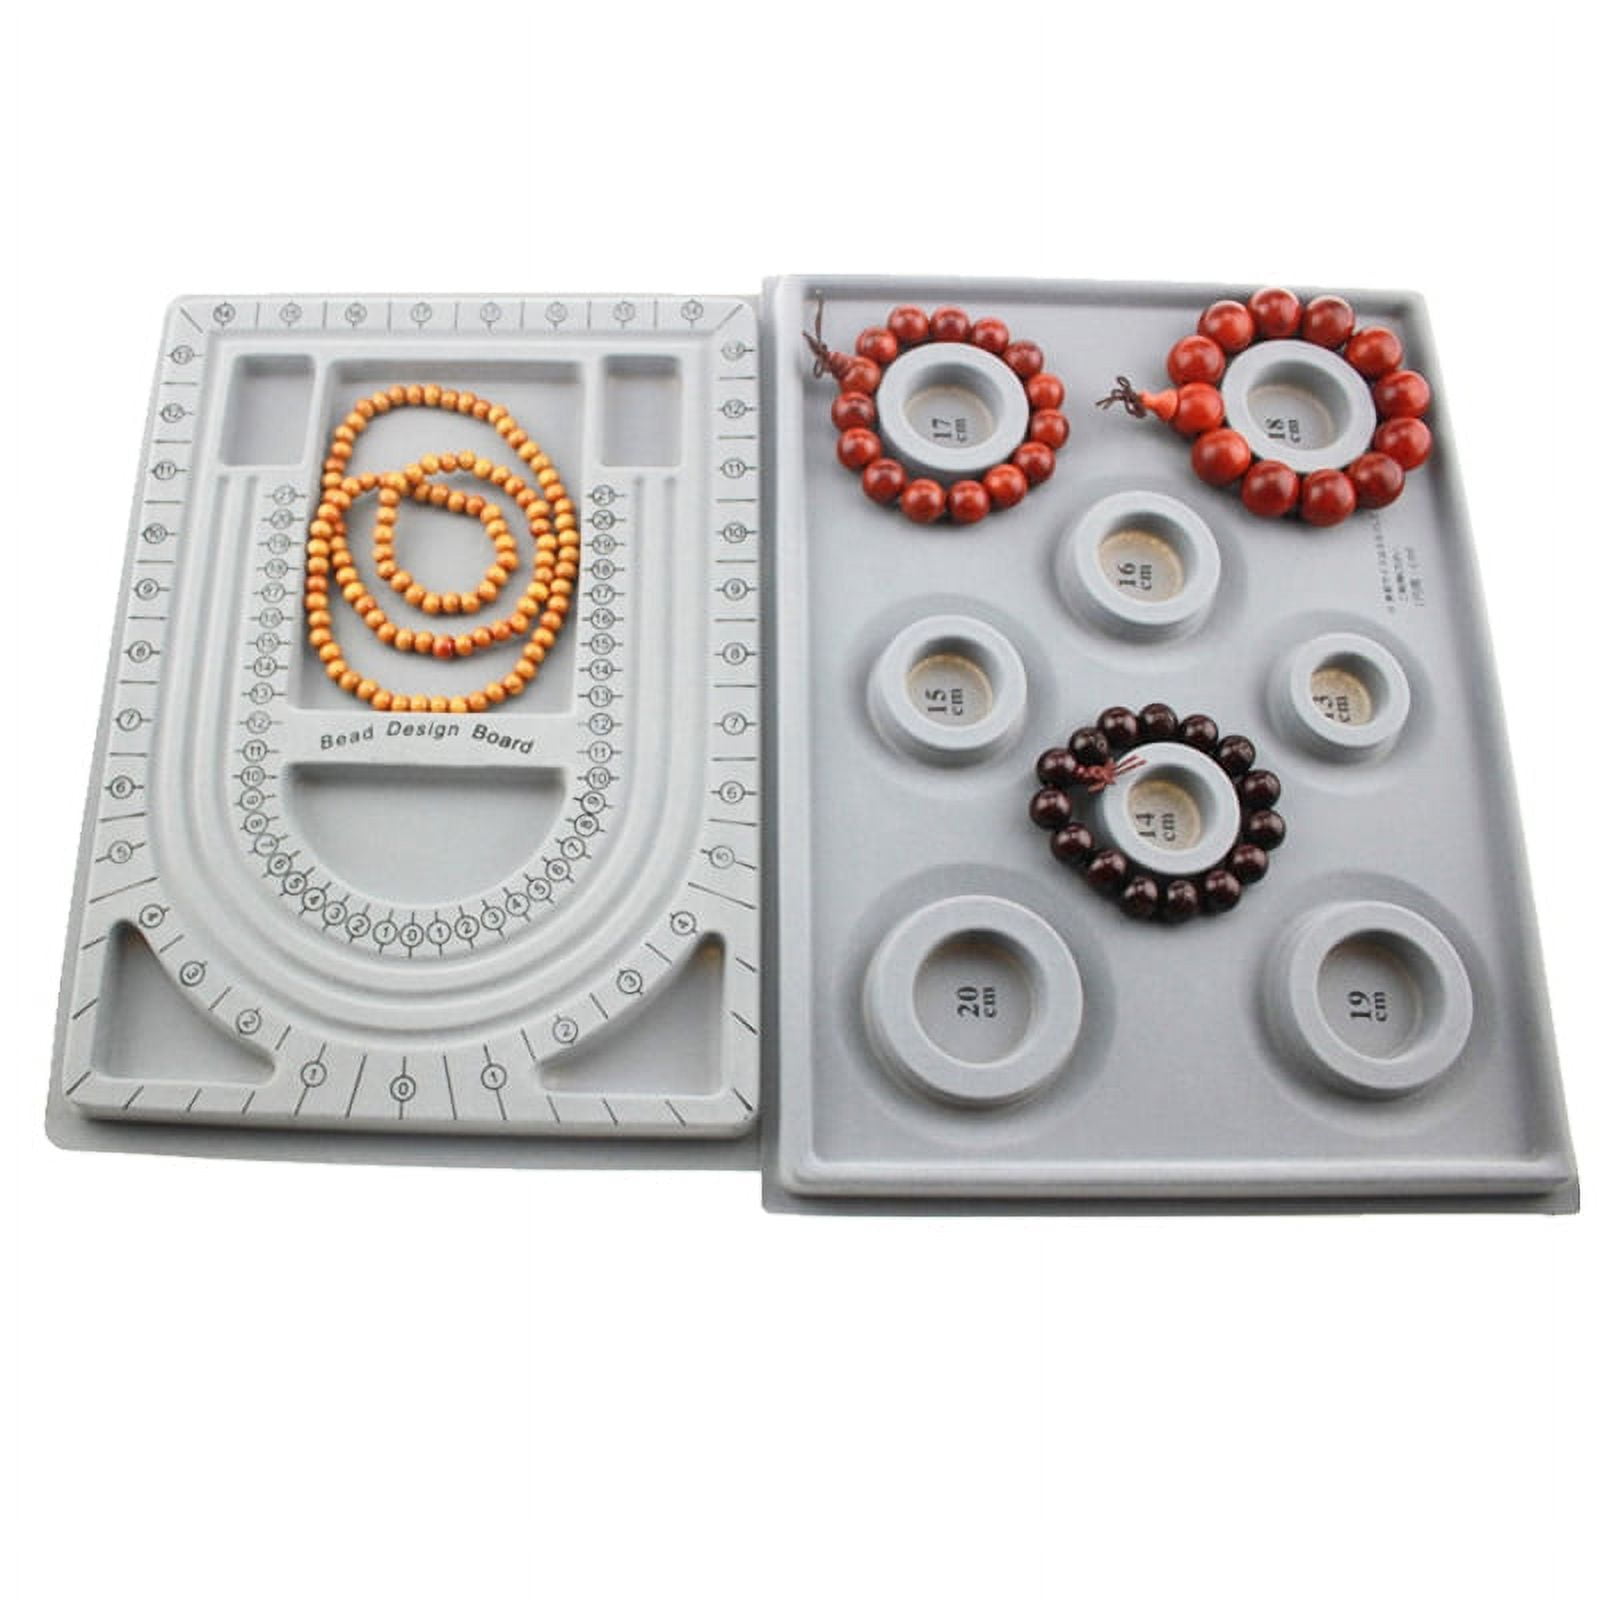 NOLITOY 2 PCS Bead Boards for Making Bead Design Boards Necklace Bracelet  Making Tray for DIY Making Storage Tray